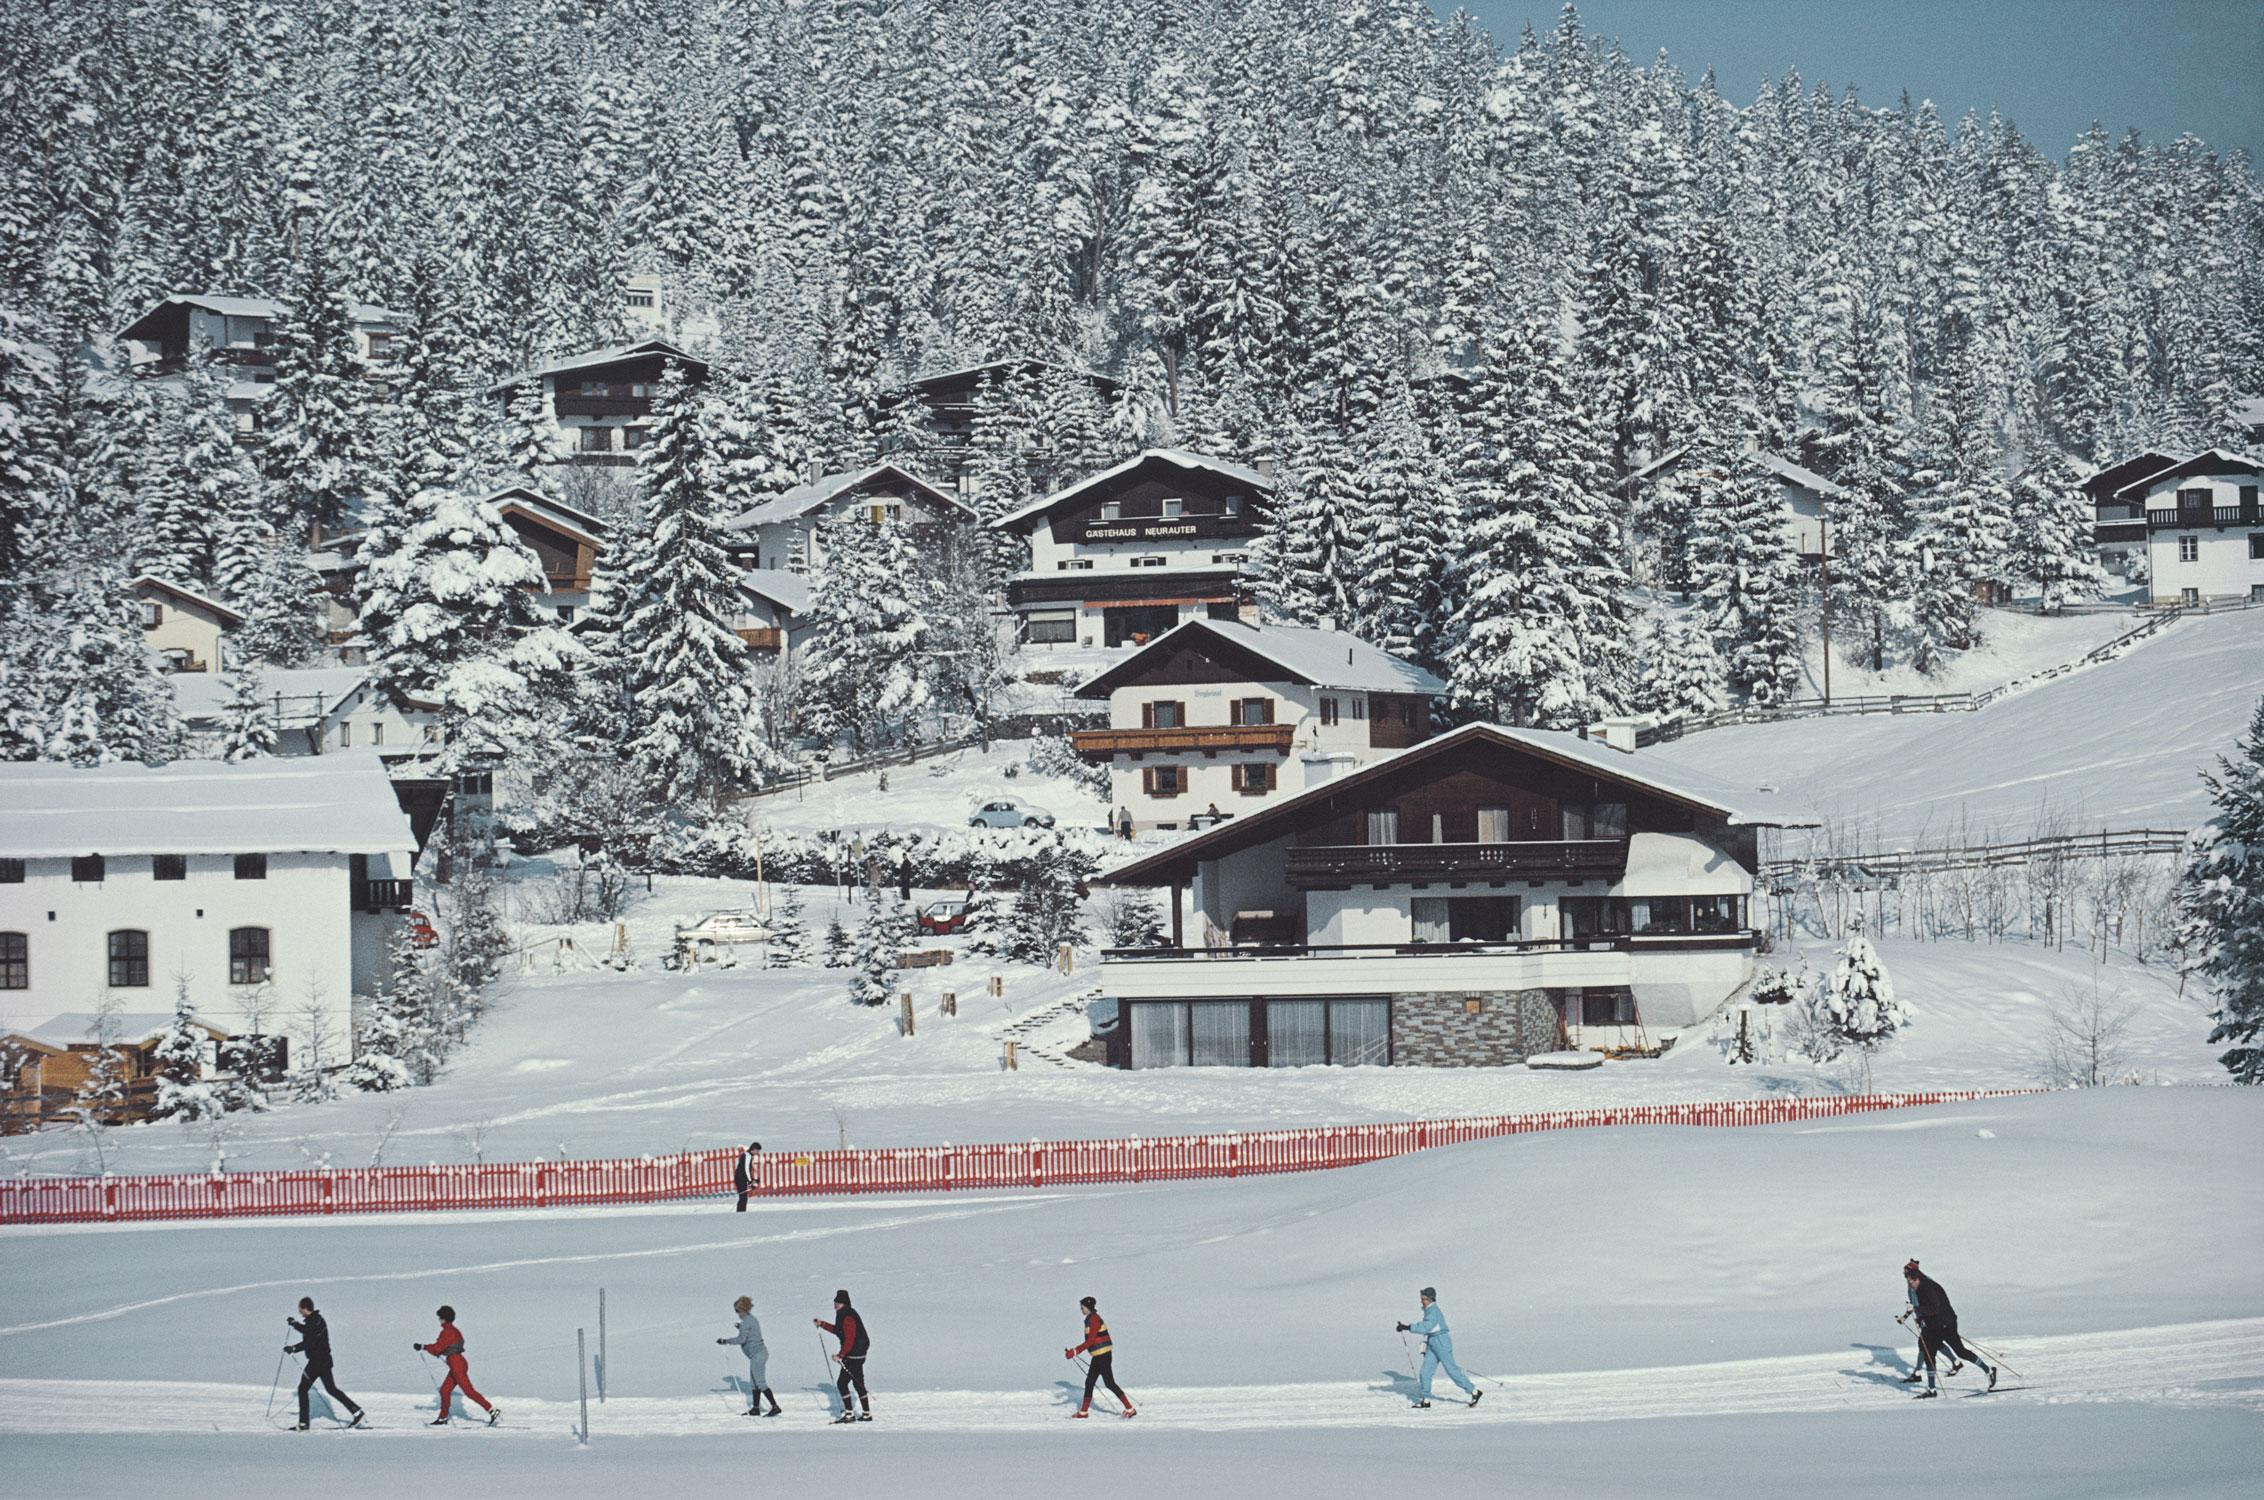 Slim Aarons
Skiing In Seefeld
1985 (printed later)
C print 
Estate stamped and numbered edition of 150 
with Certificate of authenticity

A group of men and women go cross-country skiing in Seefeld, Austria, 1985. (Photo by Slim Aarons/Hulton